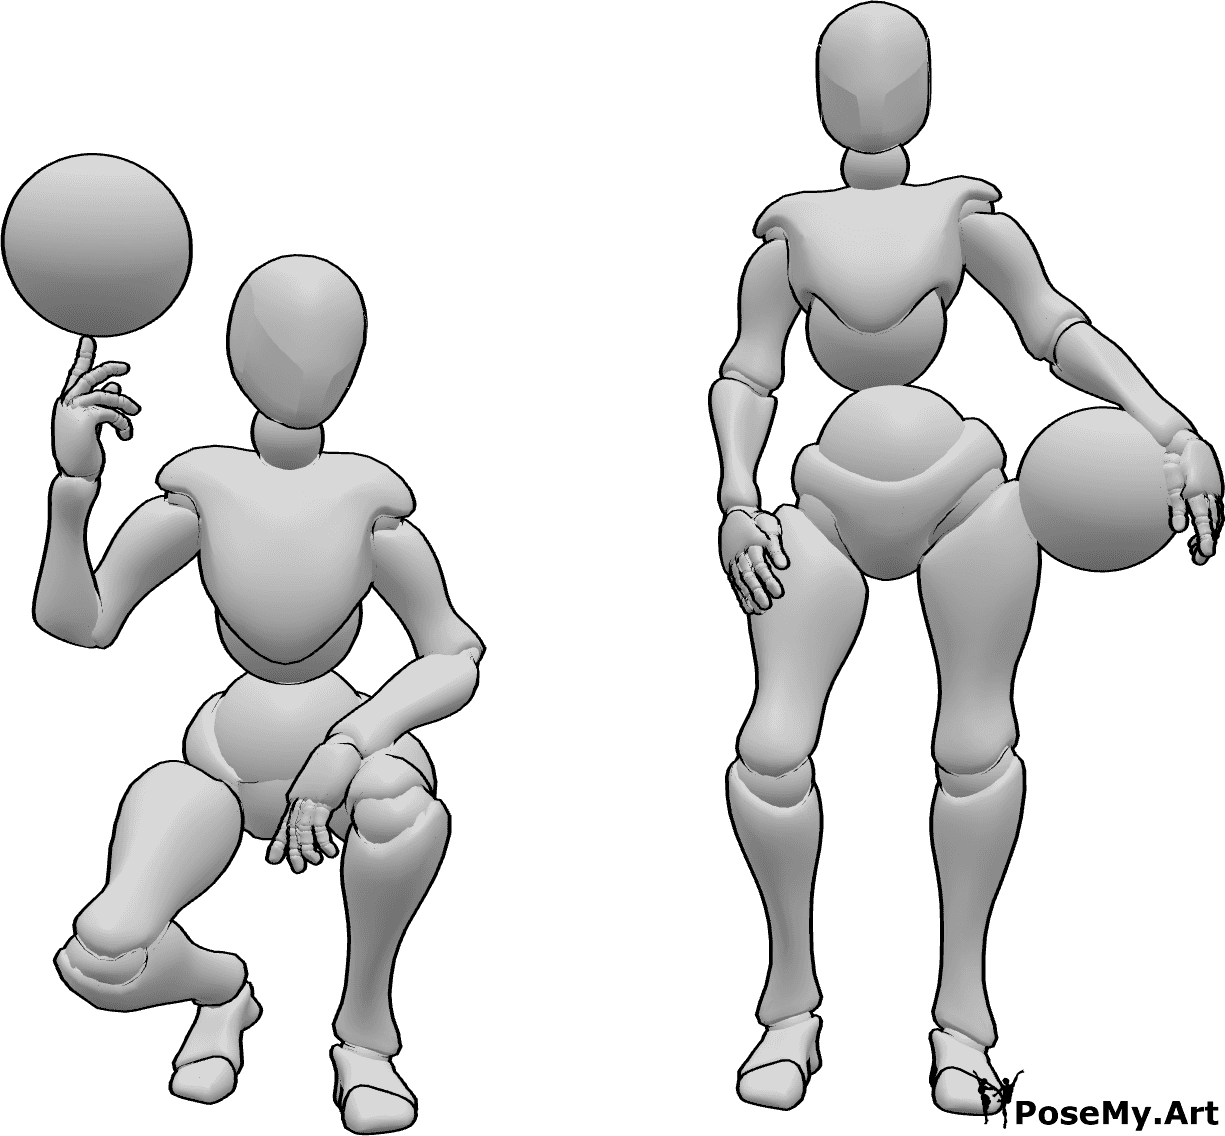 Pose Reference - Female volleyball players pose - Two female volleyball players are posing confidently, holding volleyballs